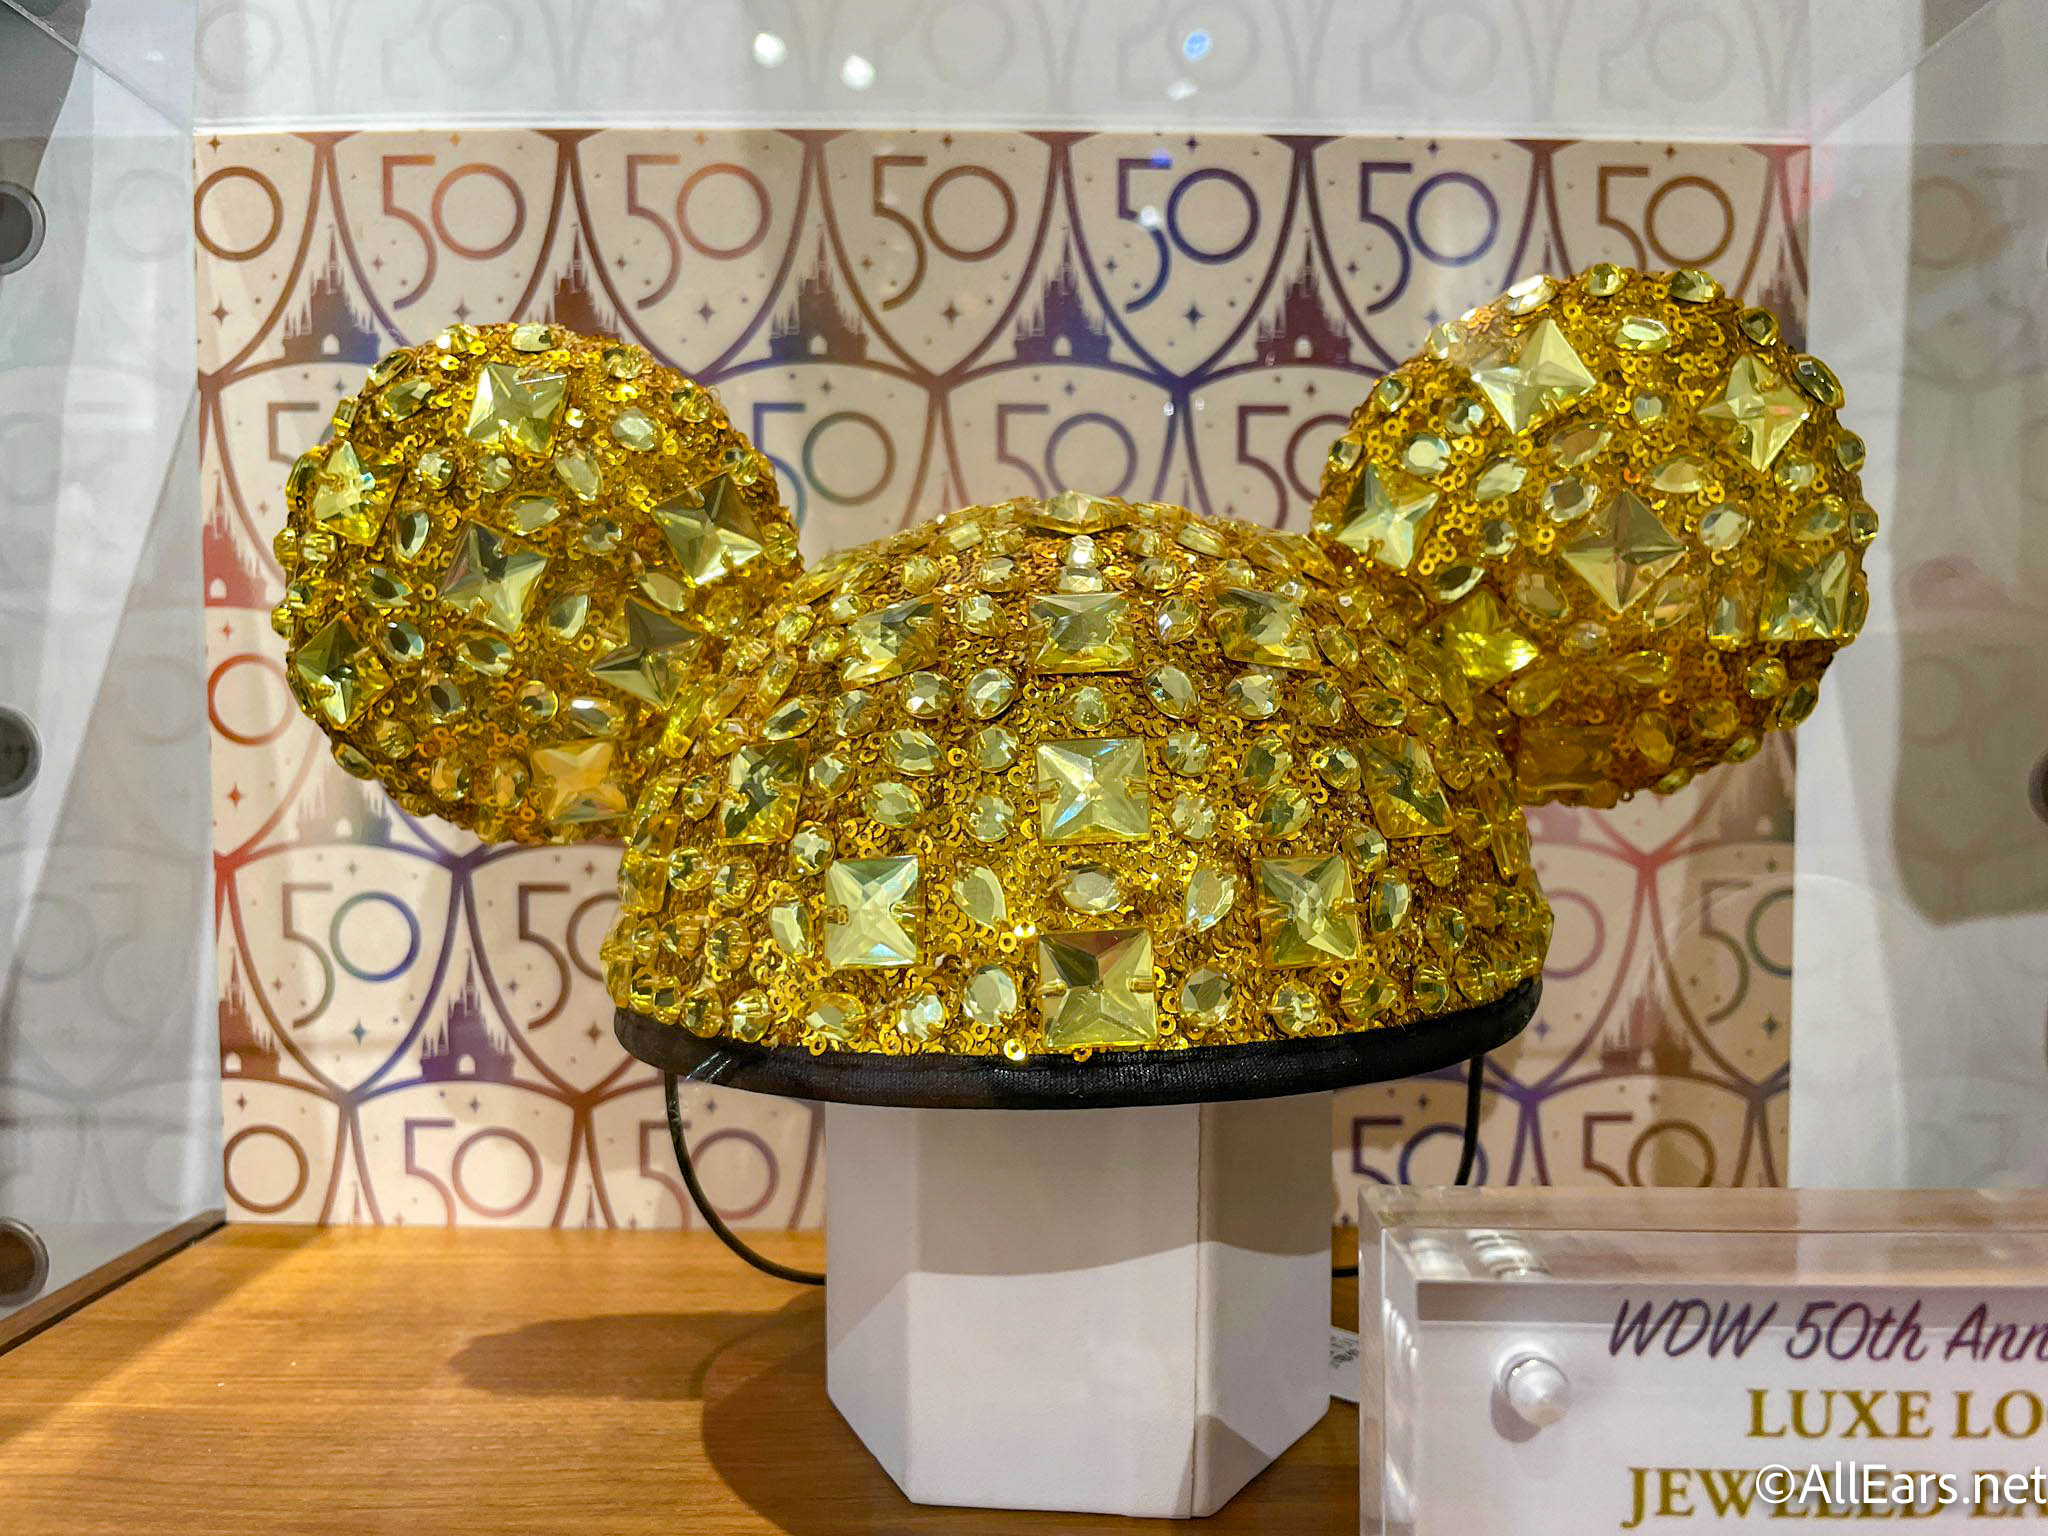 https://allears.net/wp-content/uploads/2021/11/wdw-2021-disney-springs-ever-after-jewelry-company-luxe-logo-collection-mickey-ear-hat-designer-2.jpg